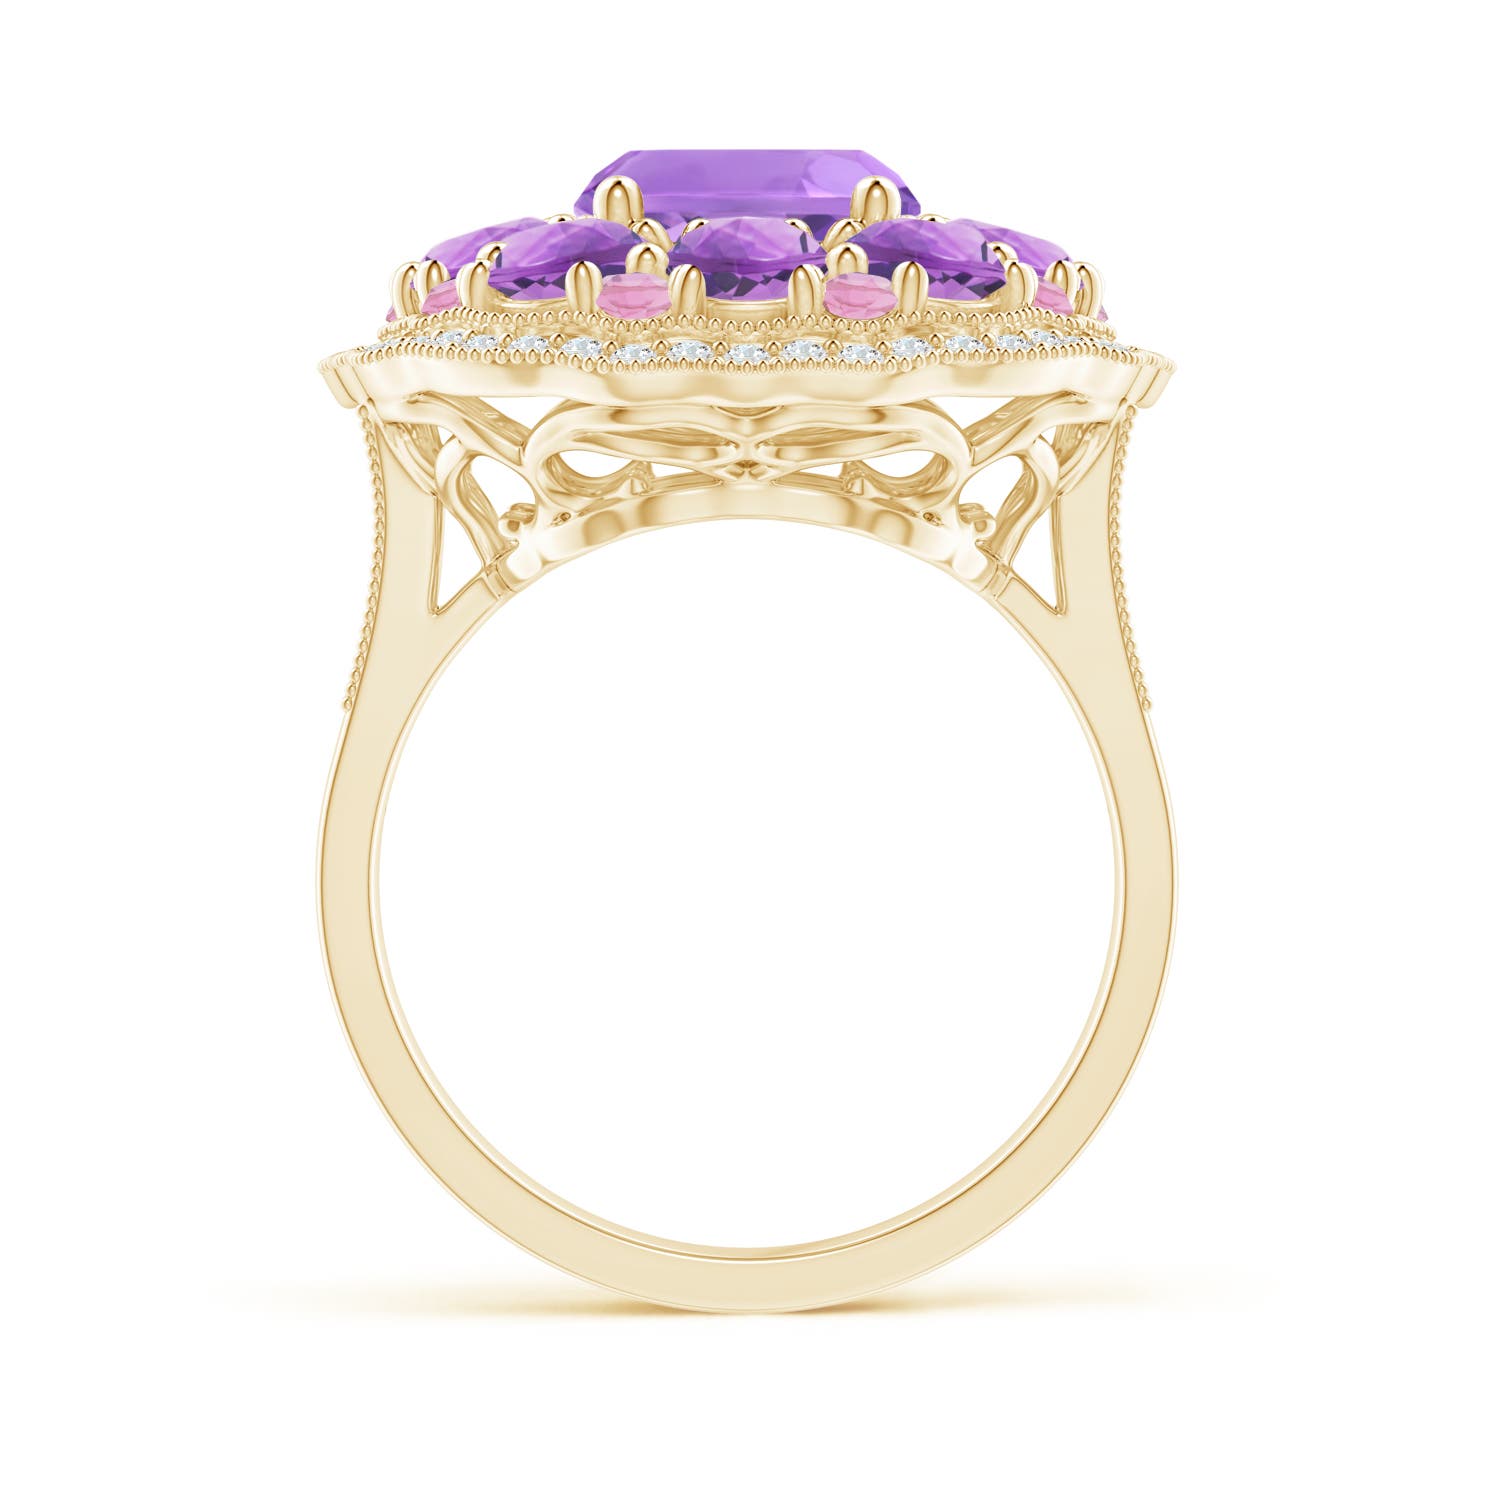 A - Amethyst / 5.85 CT / 14 KT Yellow Gold